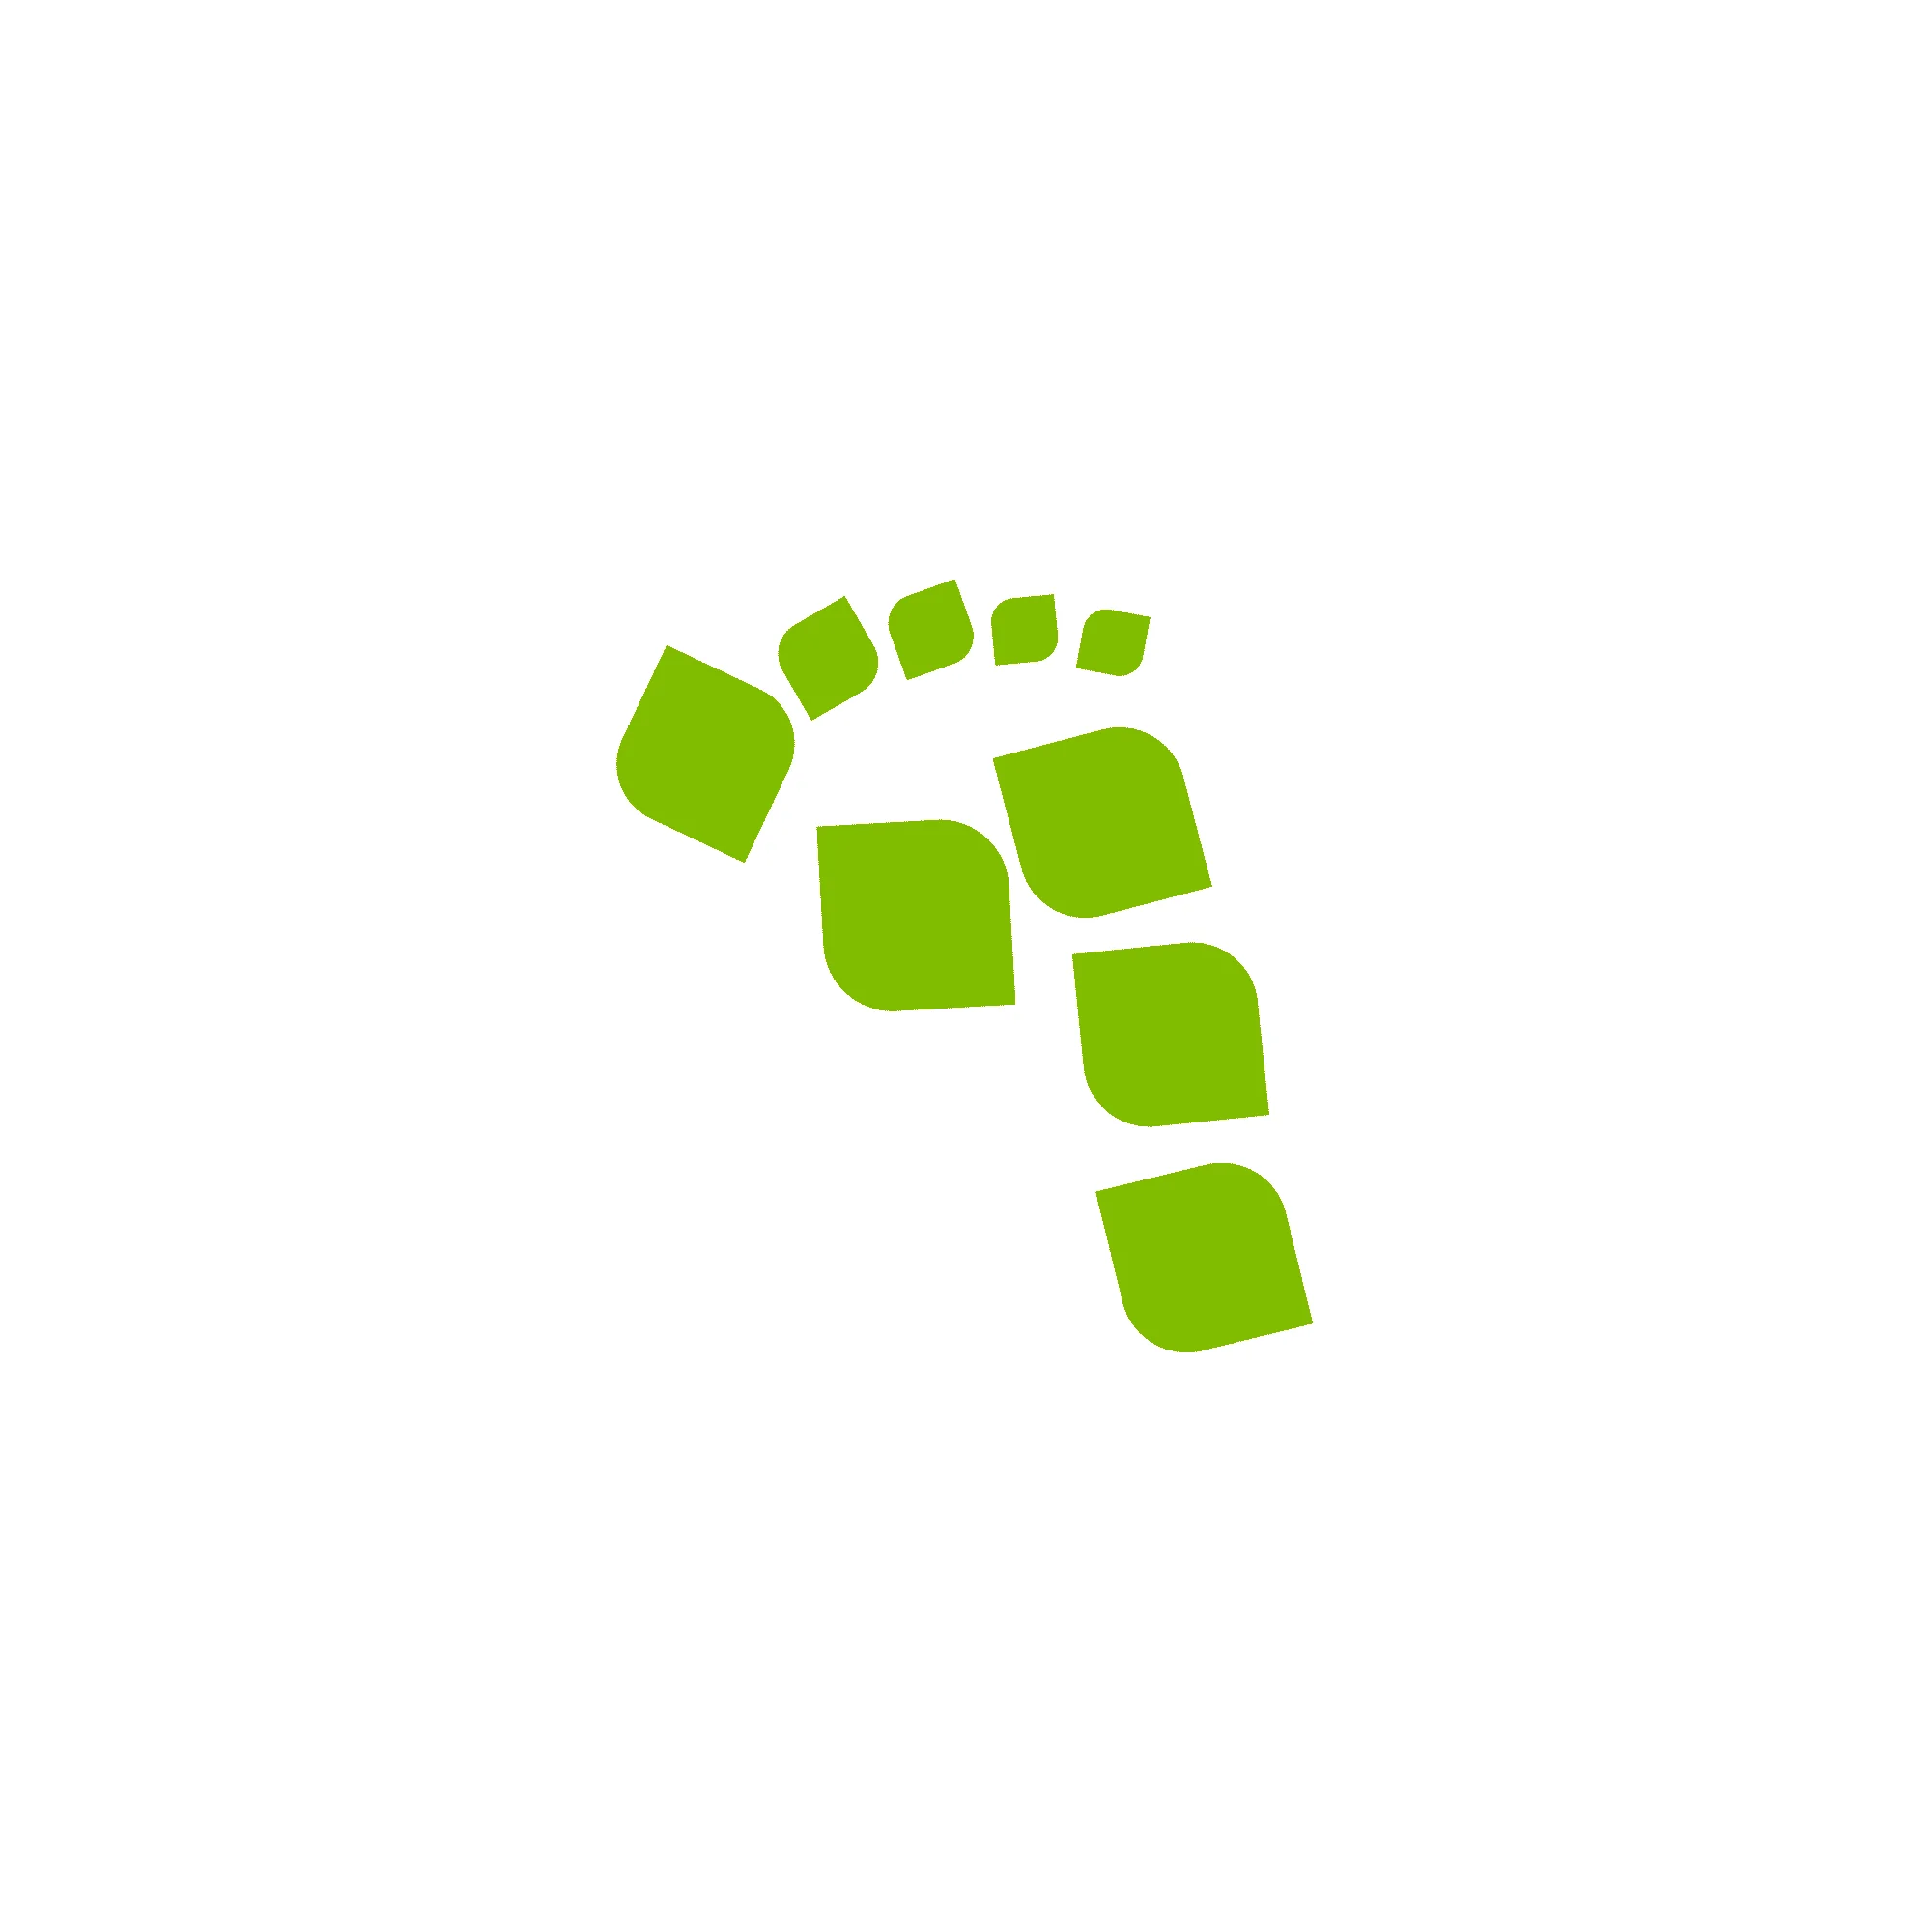 Branding Logo Design foot shape made out of stones, lime green